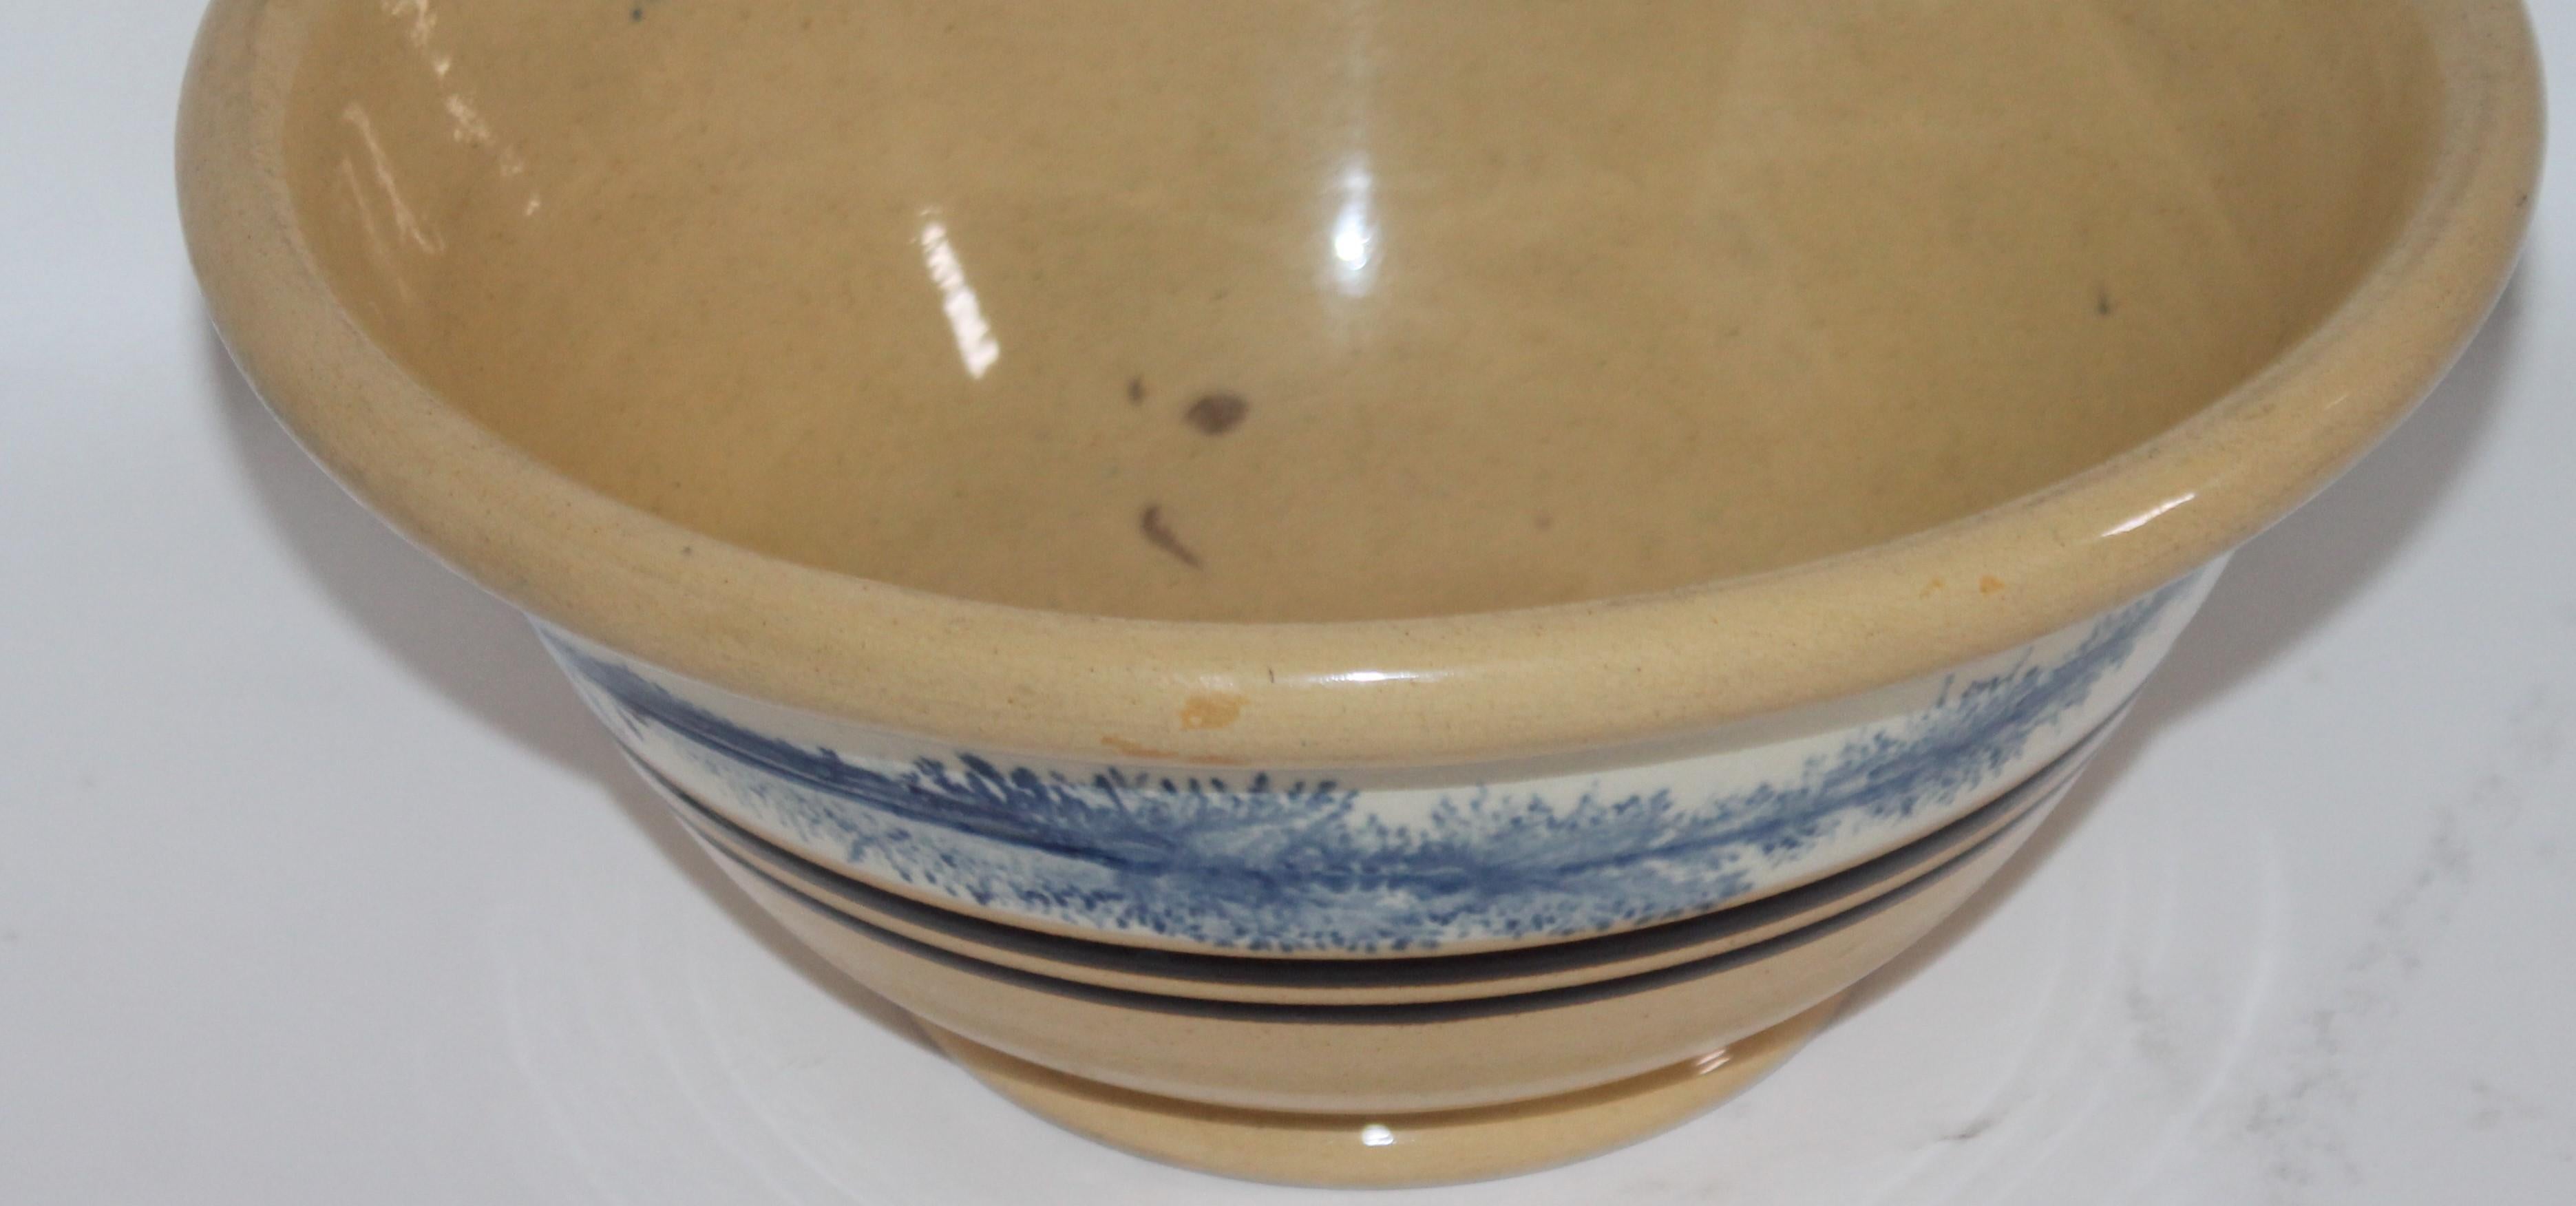 Pottery 19th Century Yellow Ware in Seaweed Pattern Mixing Bowls, Pair For Sale